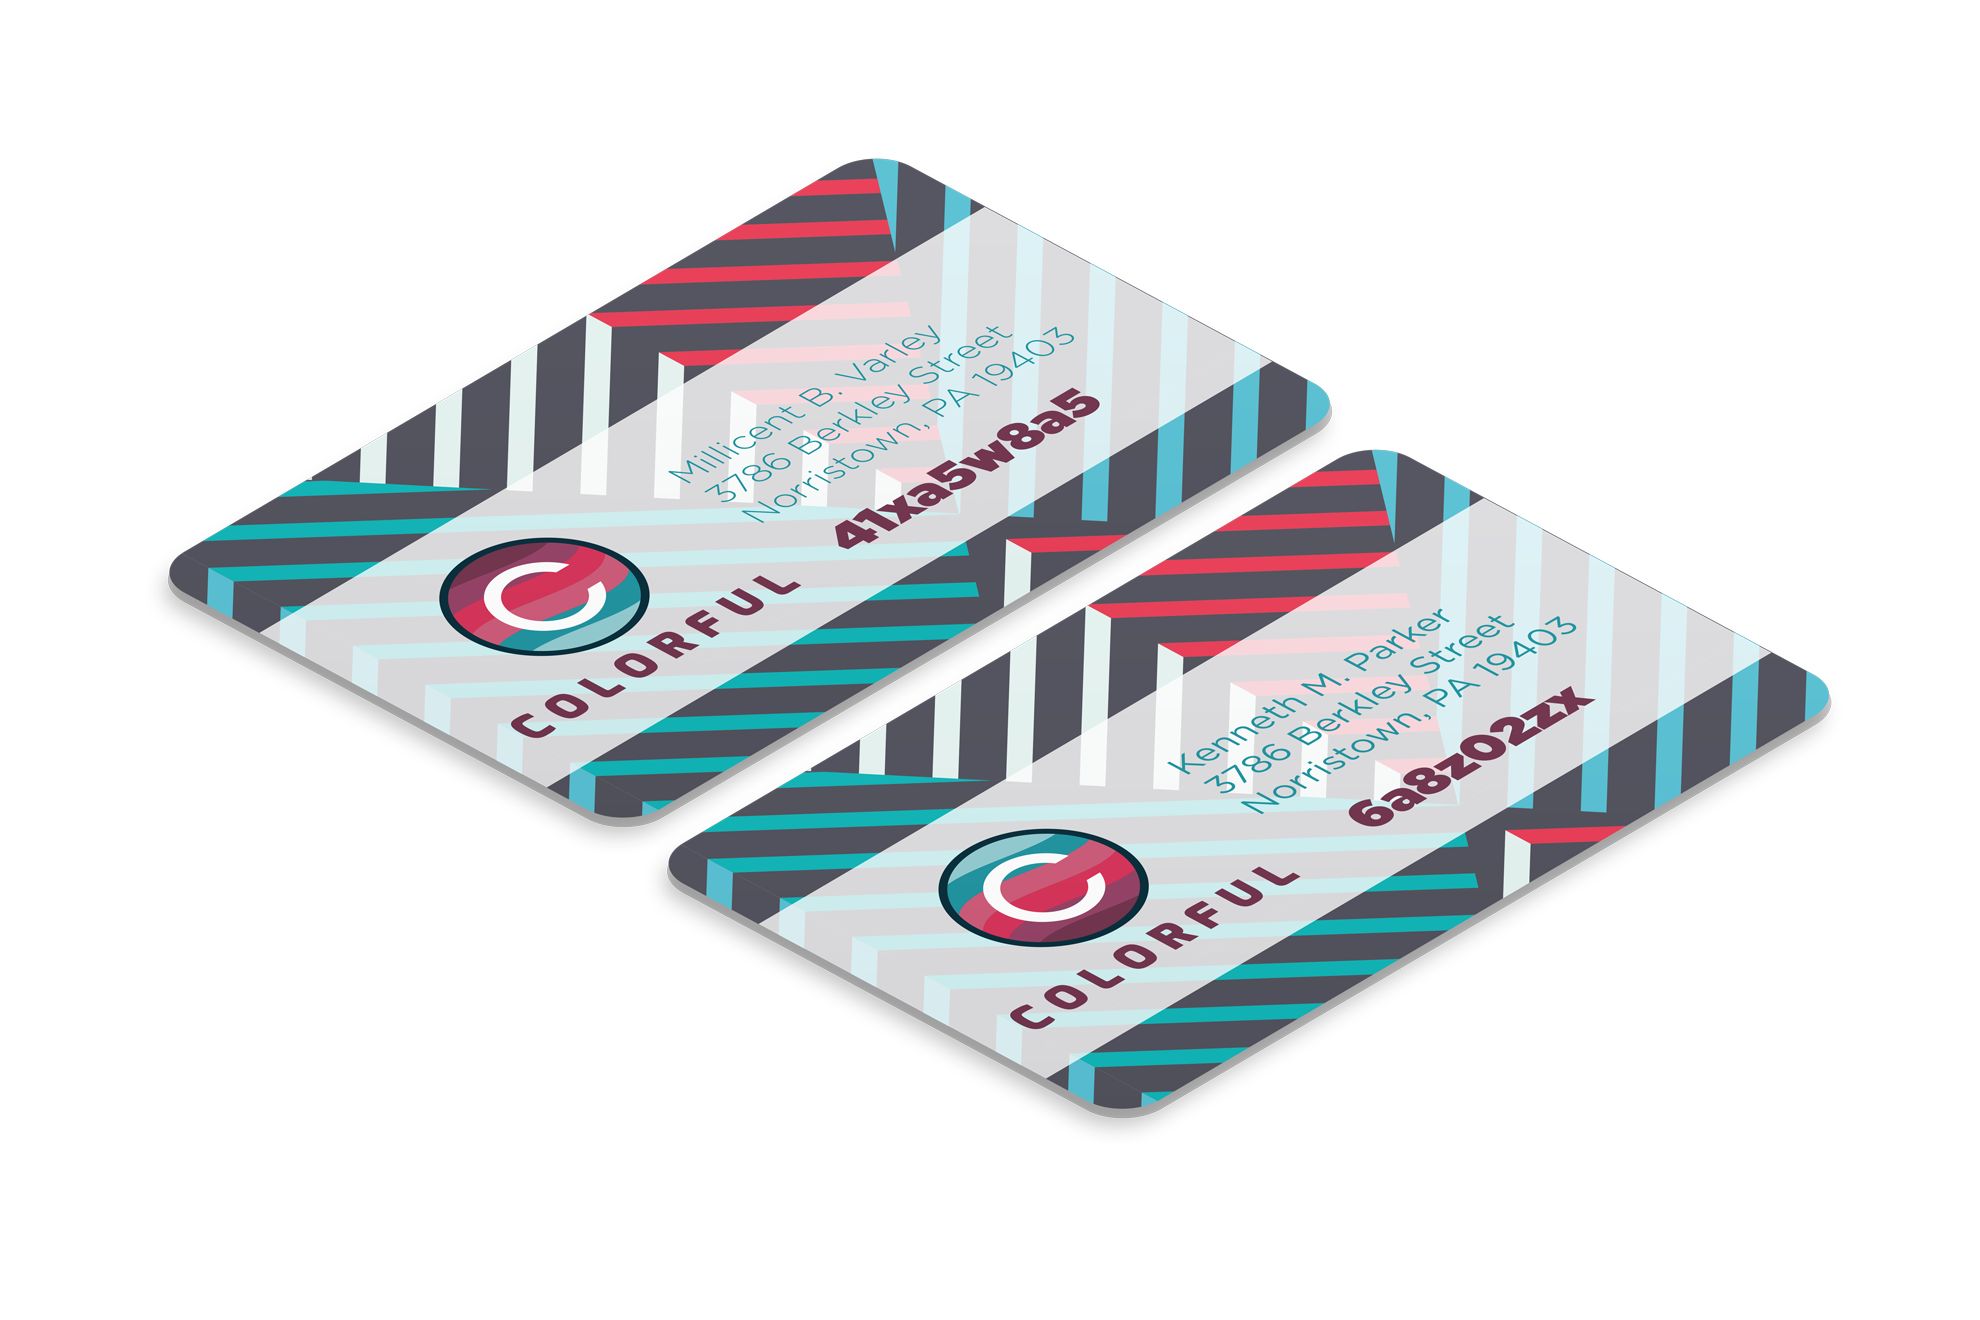 Print Online Cards with Alphanumeric Response. It's Advantageous!: Print your PVC cards with alphanumeric response with the practical online service of Sprint24: fast print and delivery with a highly professional quality.